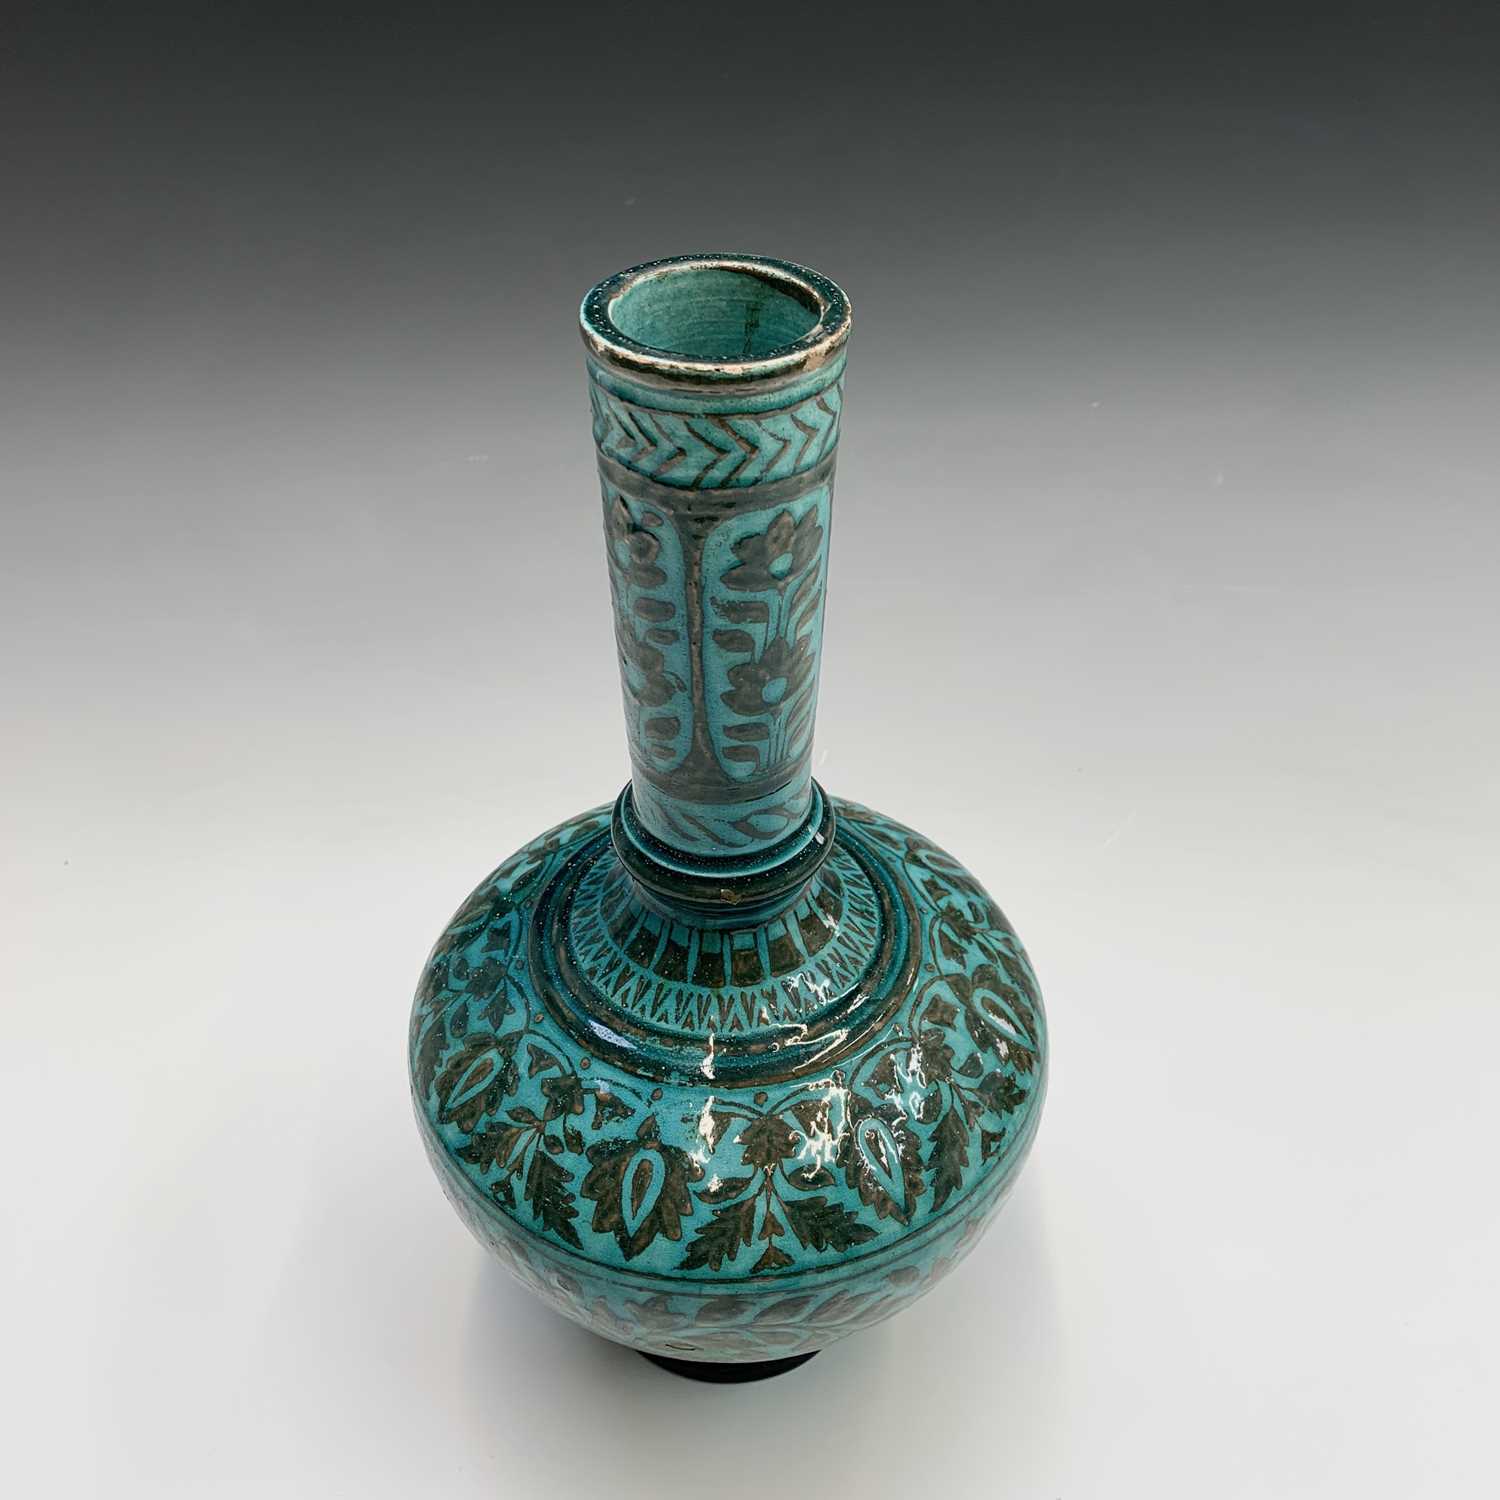 A Persian pottery bottle vase, the turquoise ground with scrolling leafy vines and flowerheads, - Image 4 of 4